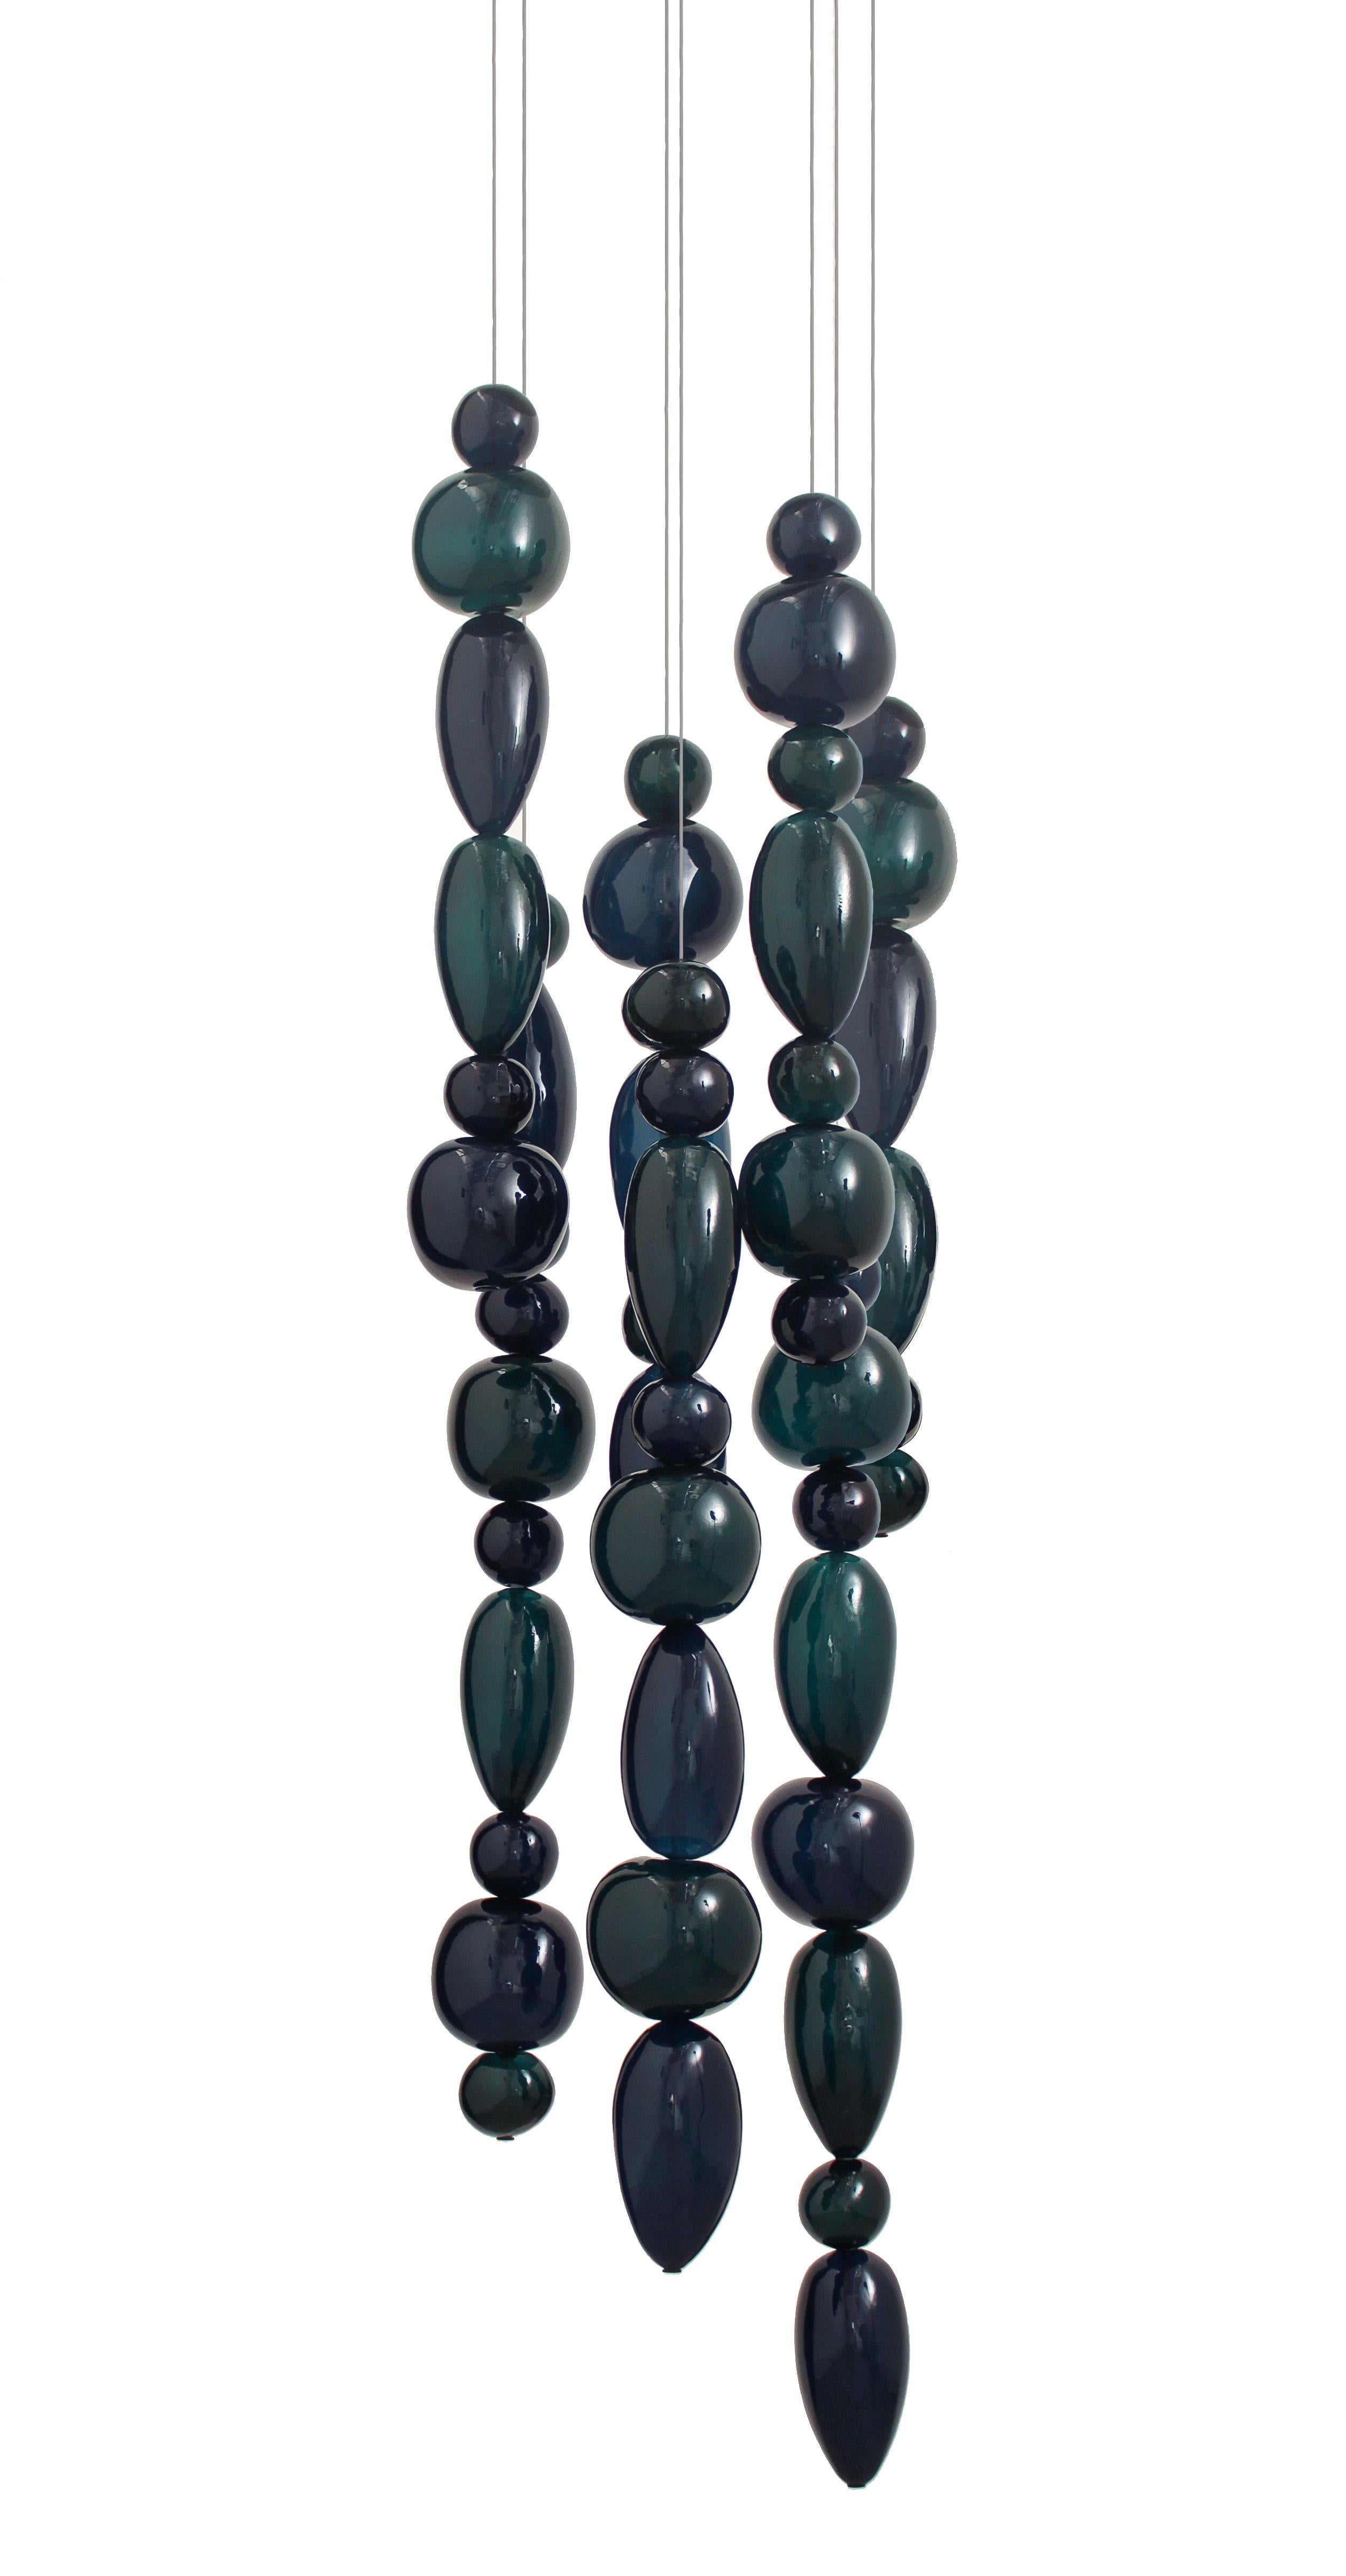 Hand blown glass pendants. 7 glass columns on 42 cm round canopy.
The Chavana collection features pebble inspired glasses stacked along a  17W LED tube, lighting up to form a cascade of light and color.
The smooth pebbles are filled with glass